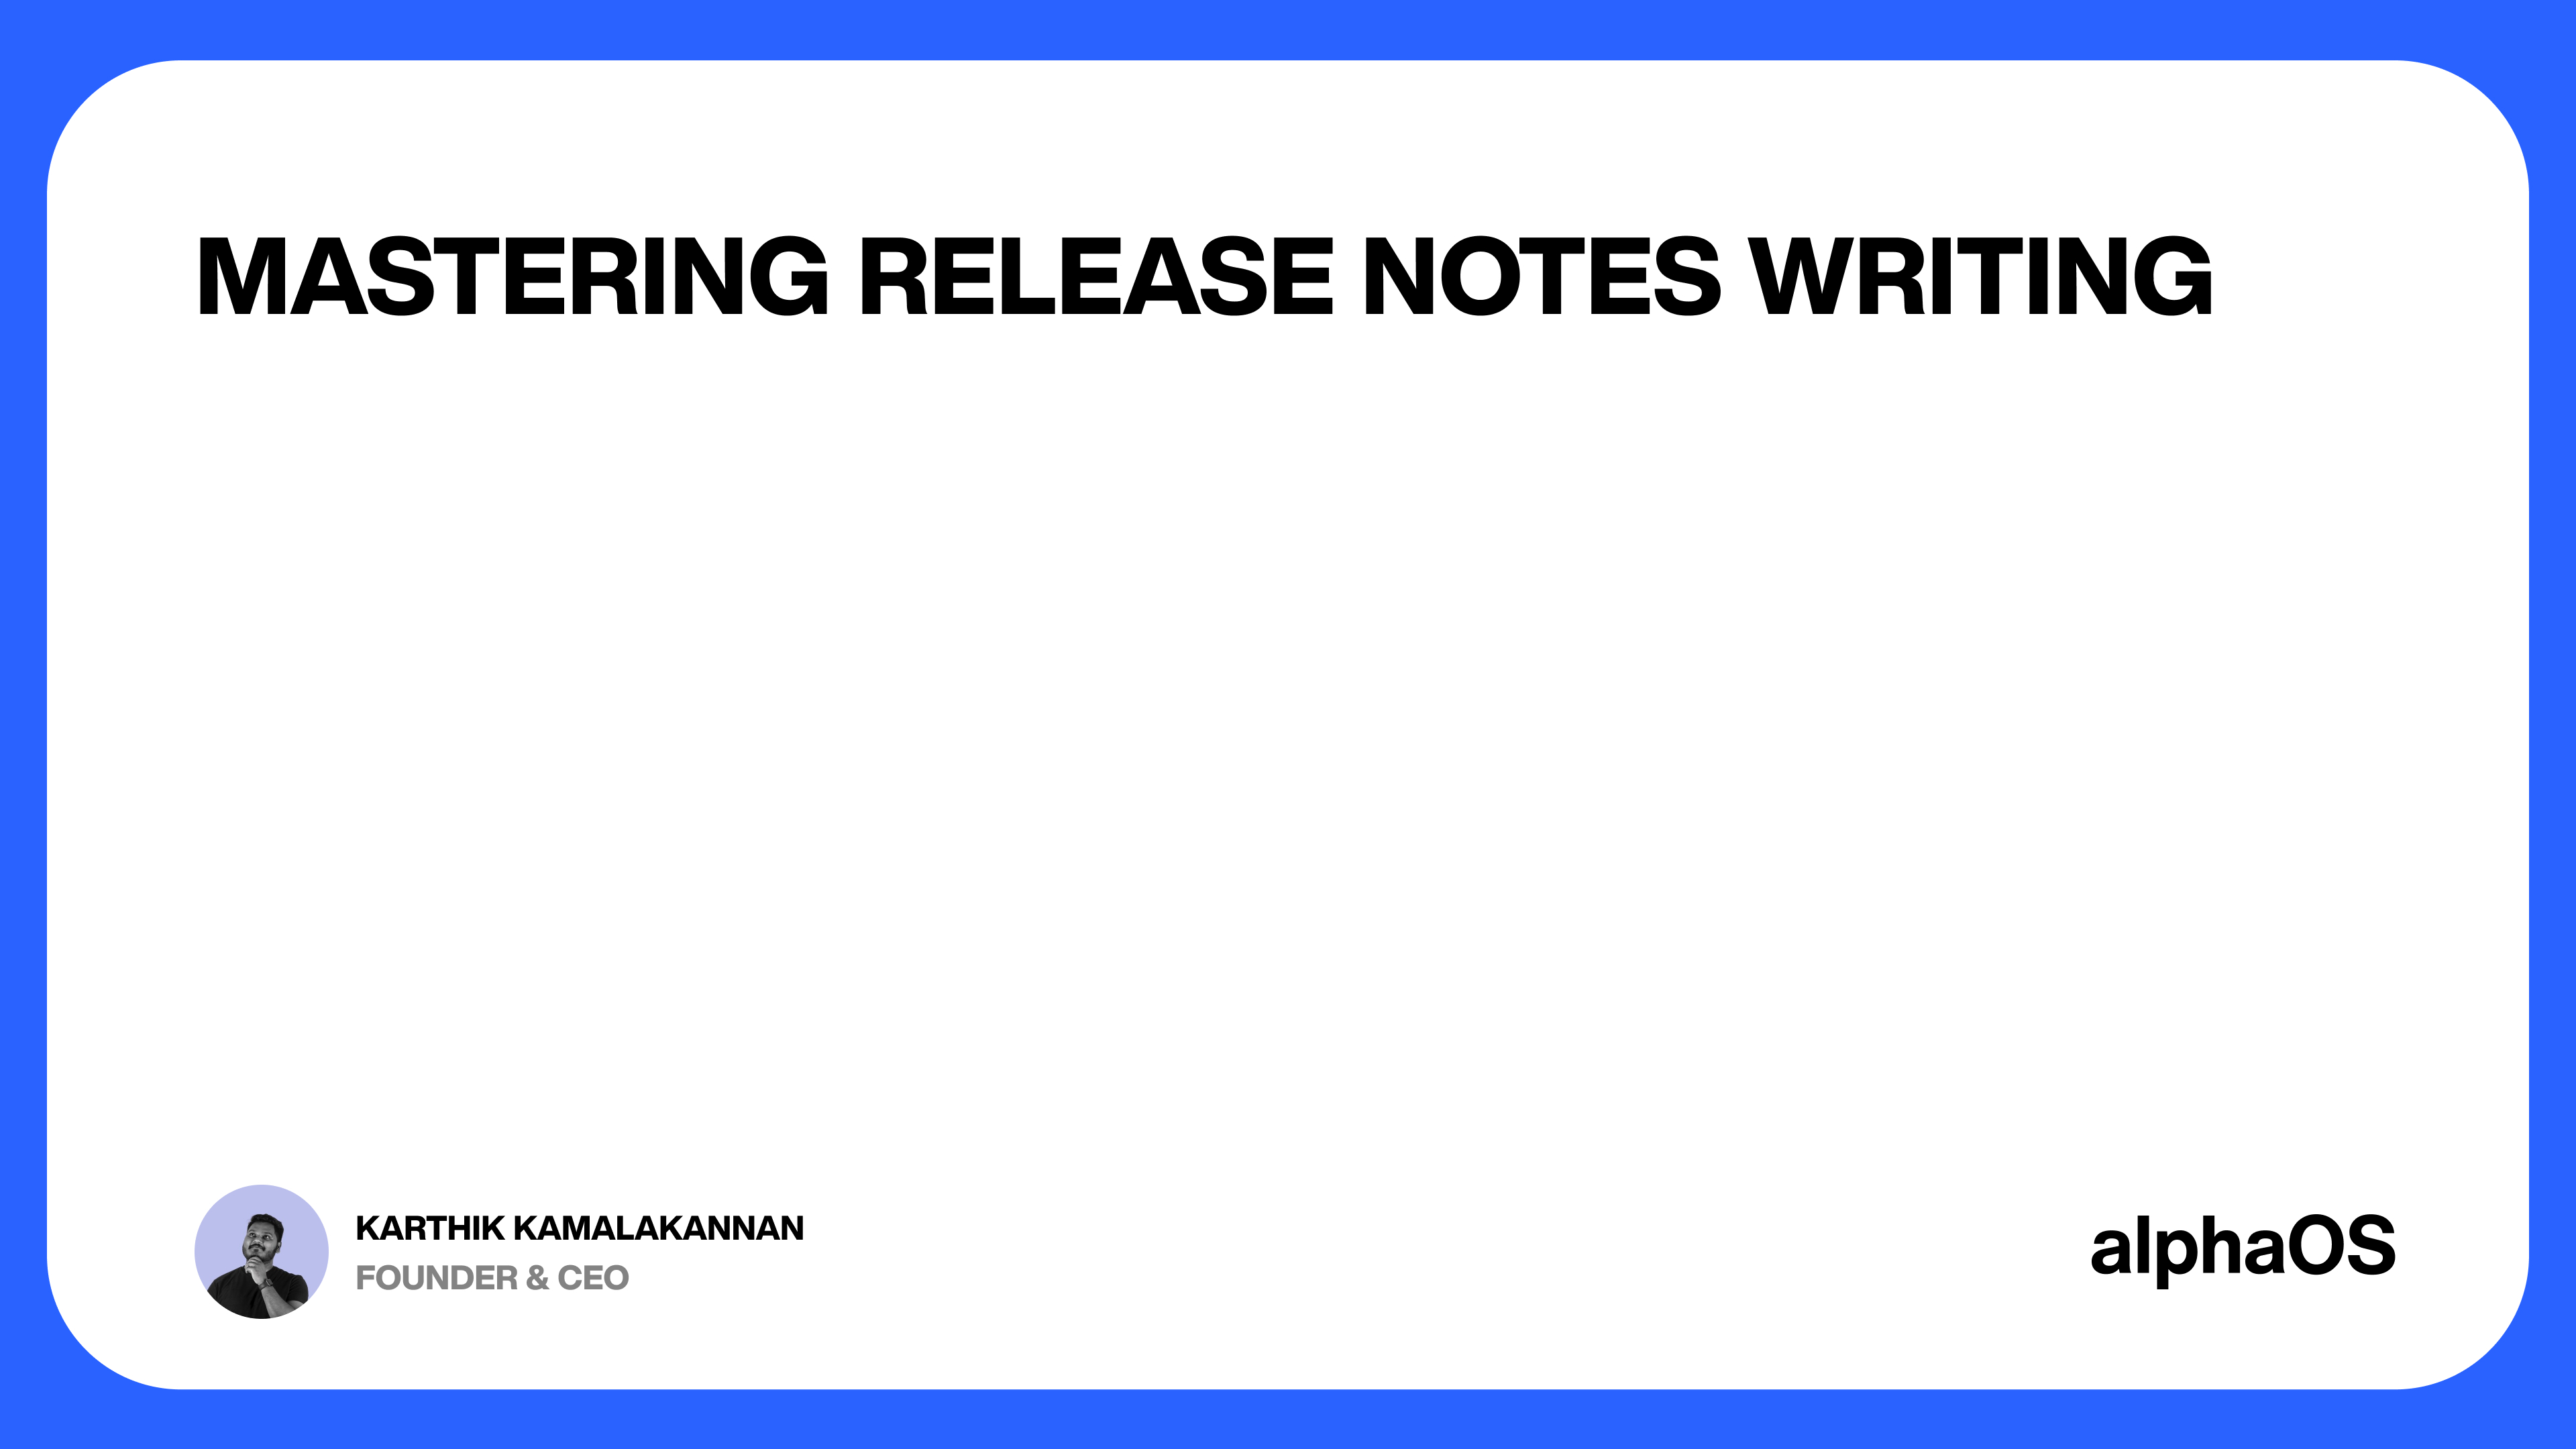 How to Write Release Notes for SaaS: Tips, Tools, and Examples